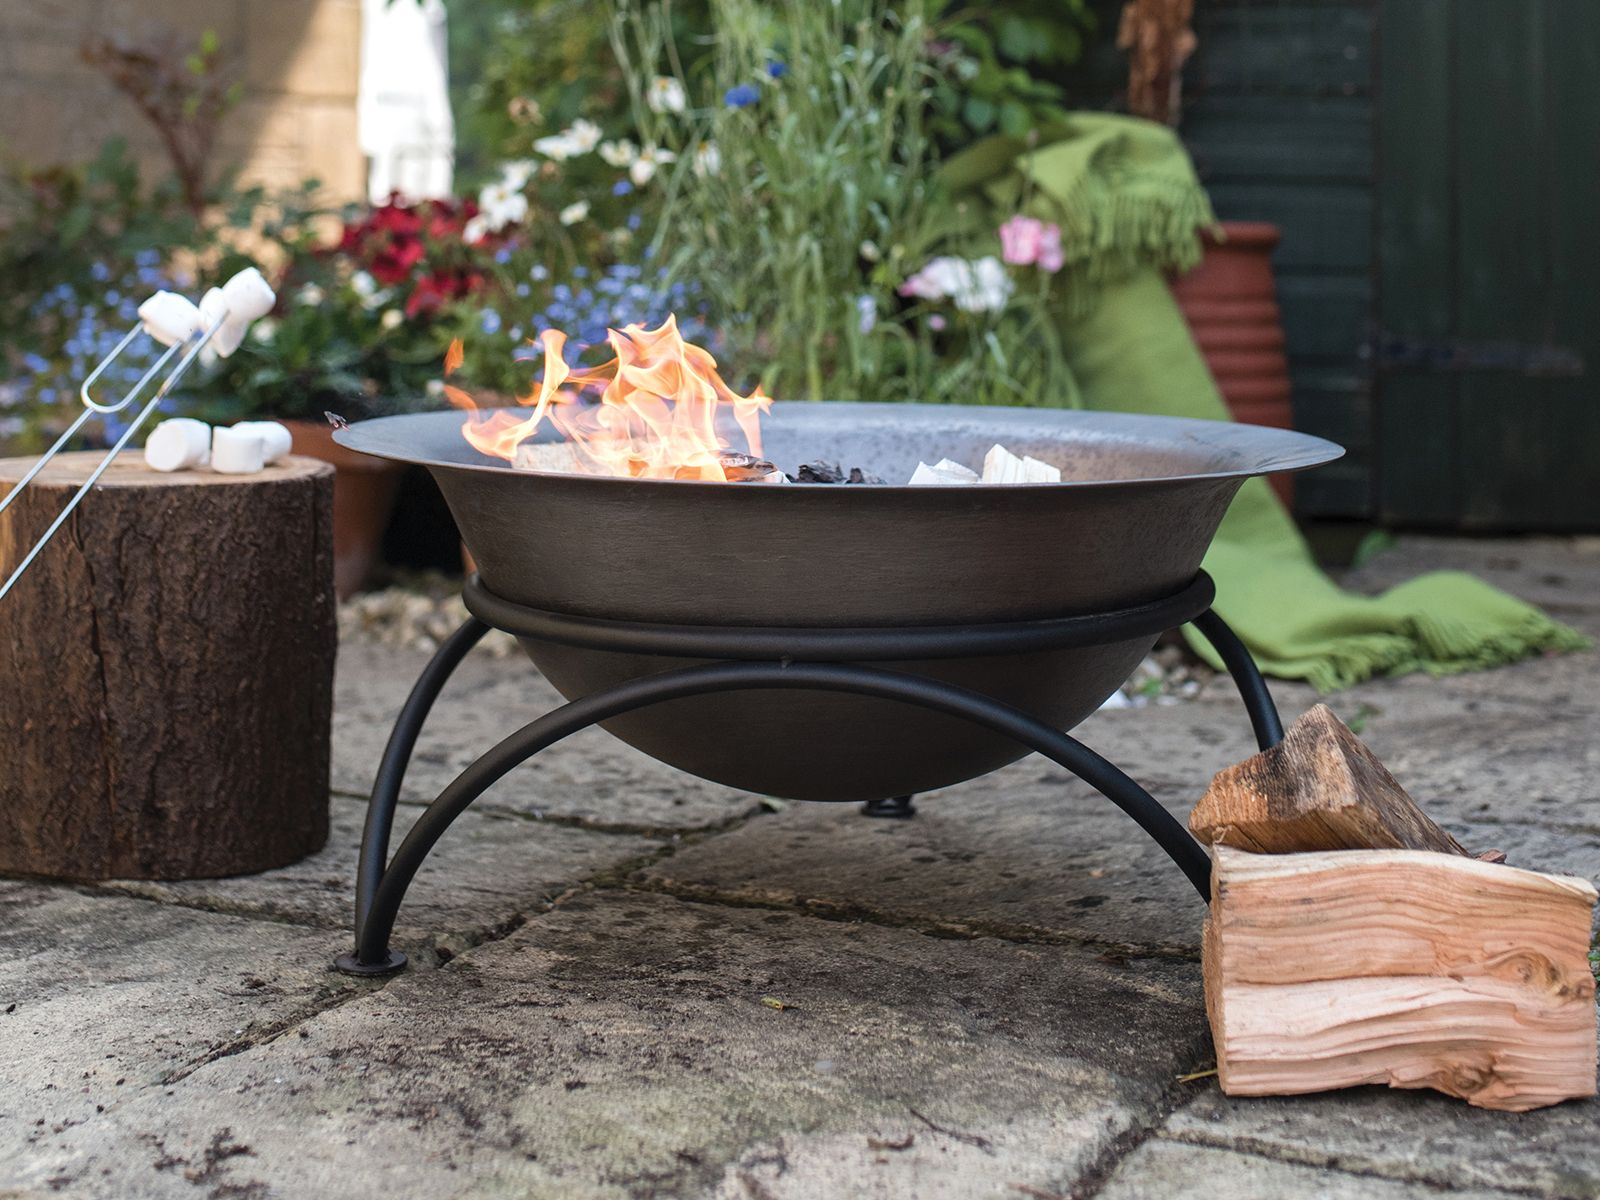 Top Tips for Keeping Warm in Your Garden This Winter